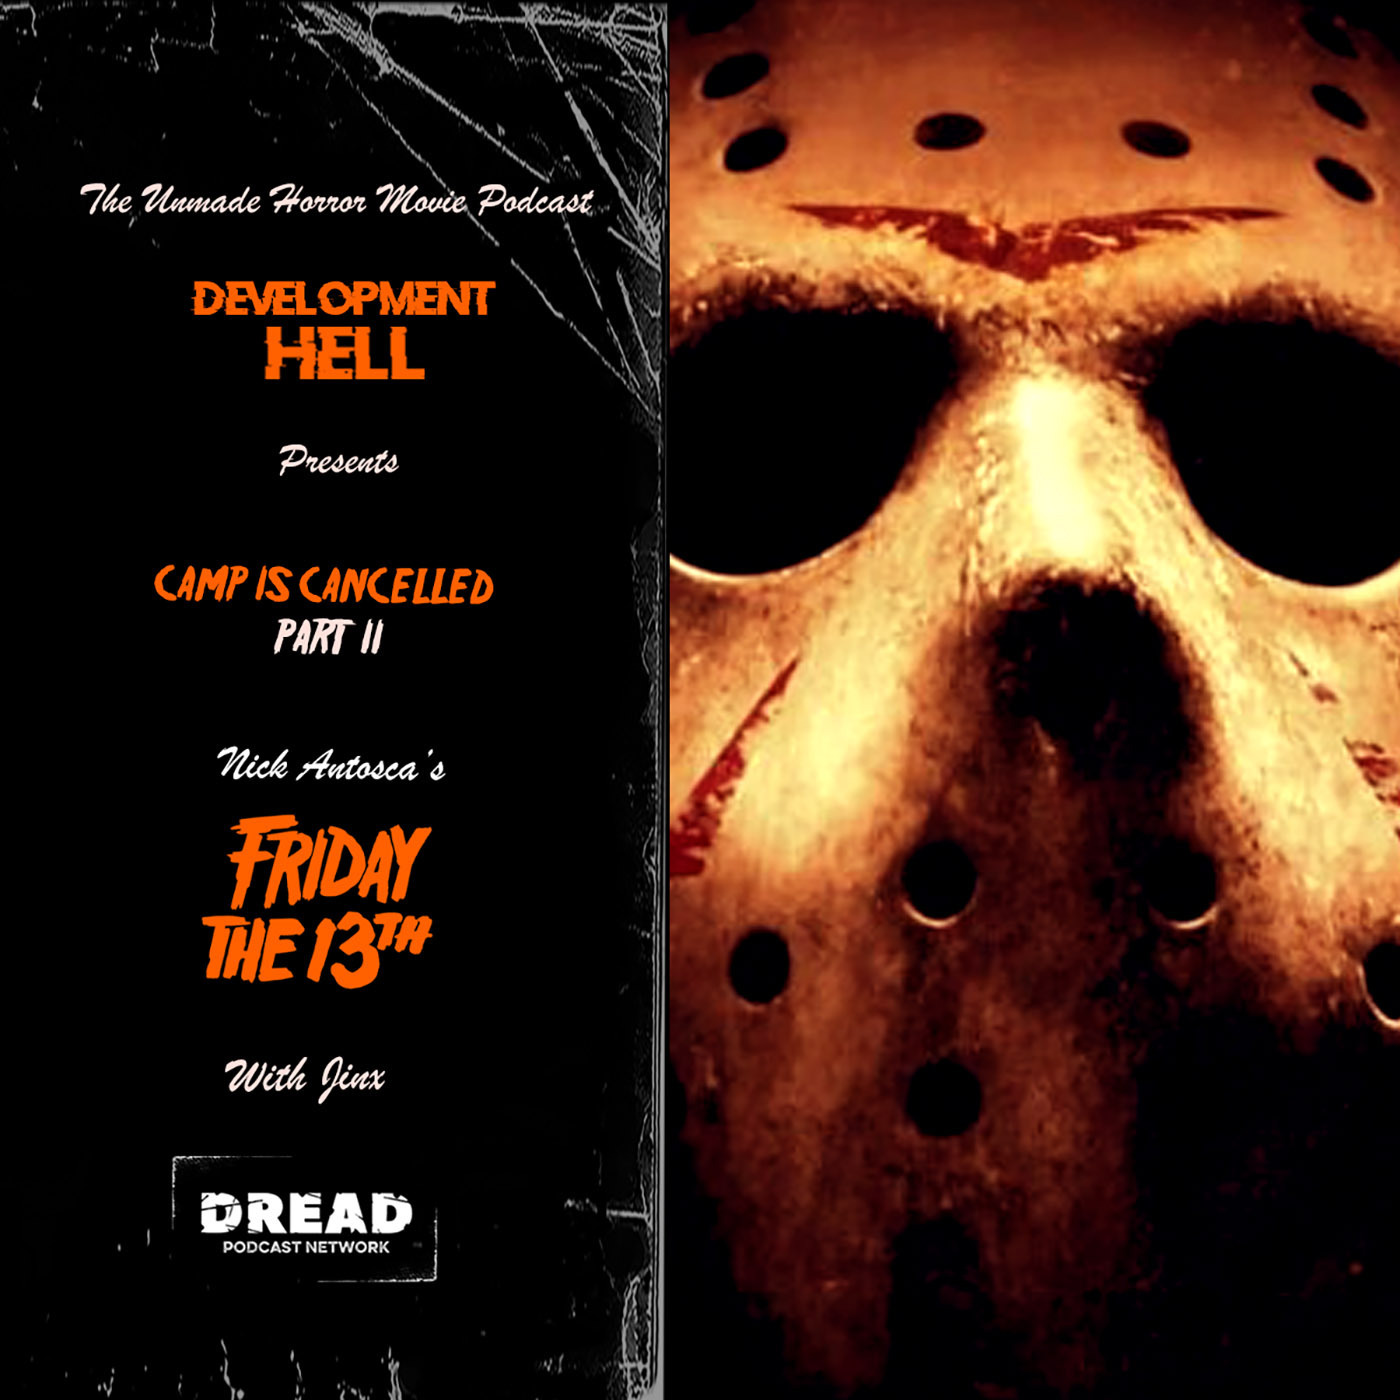 Nick Antosca's FRIDAY THE 13TH [Camp is Cancelled Part II]